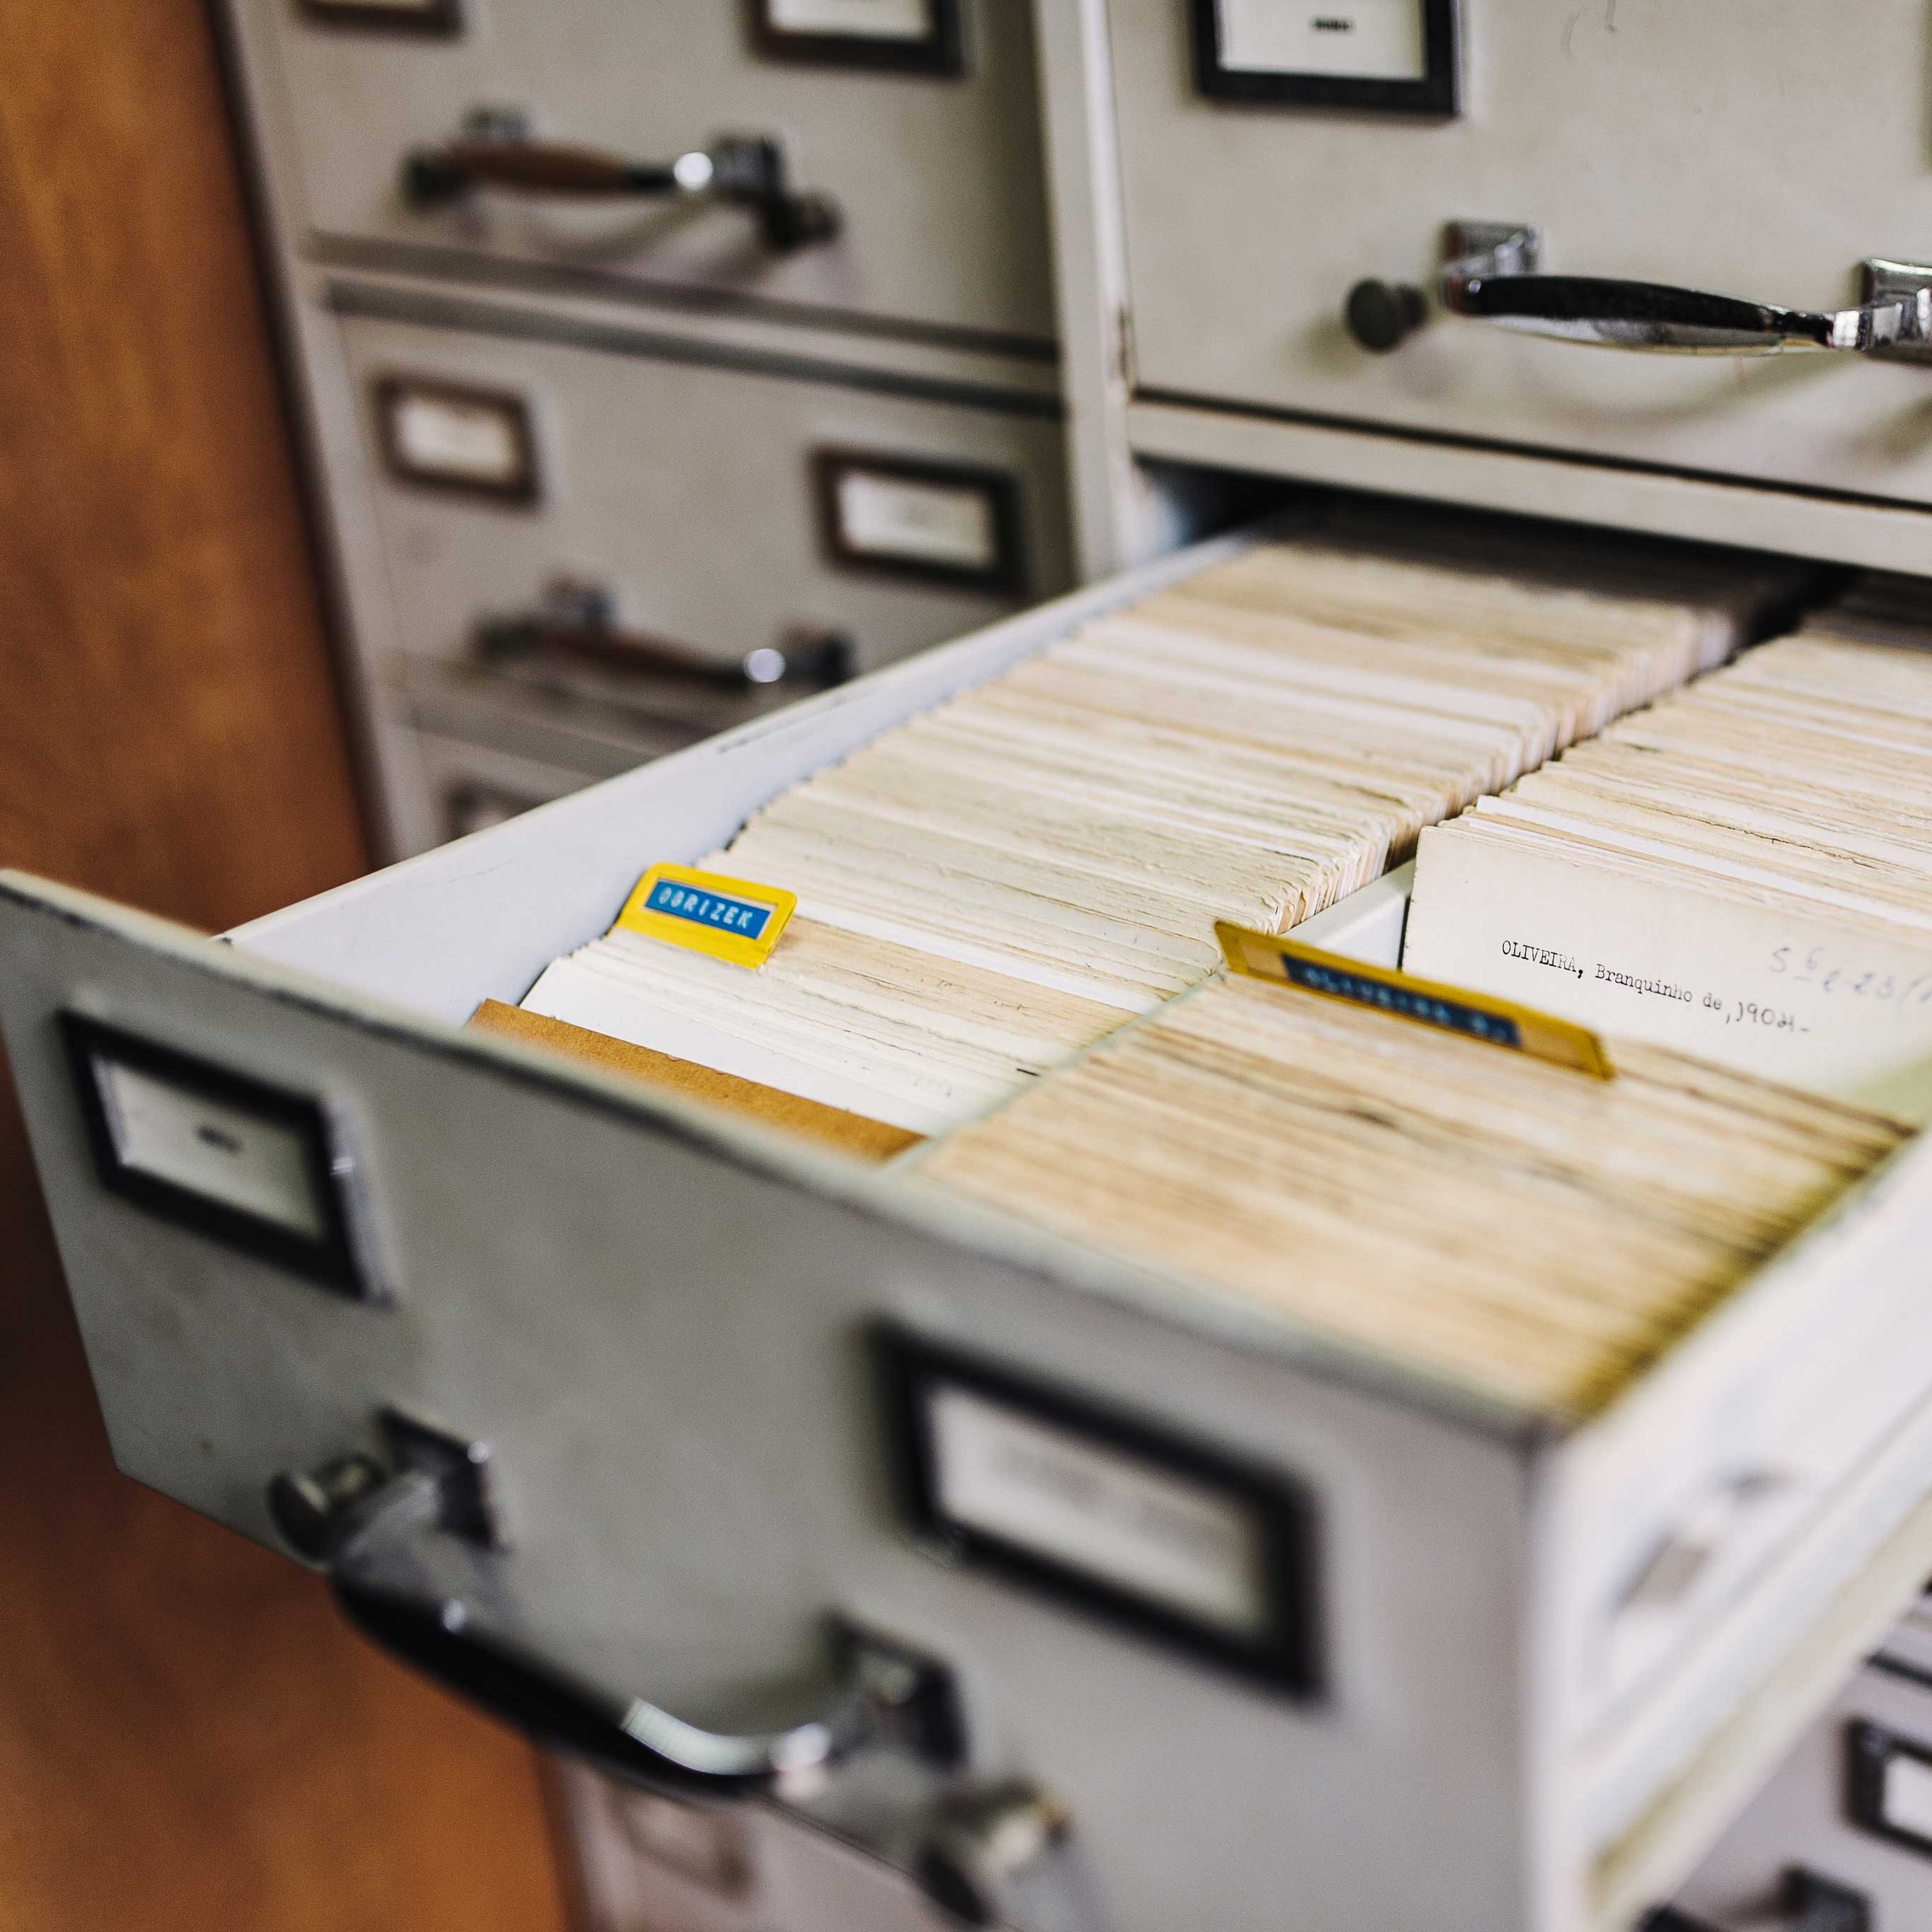 A file drawer is open in a tall white file cabinet, showing index cards inside